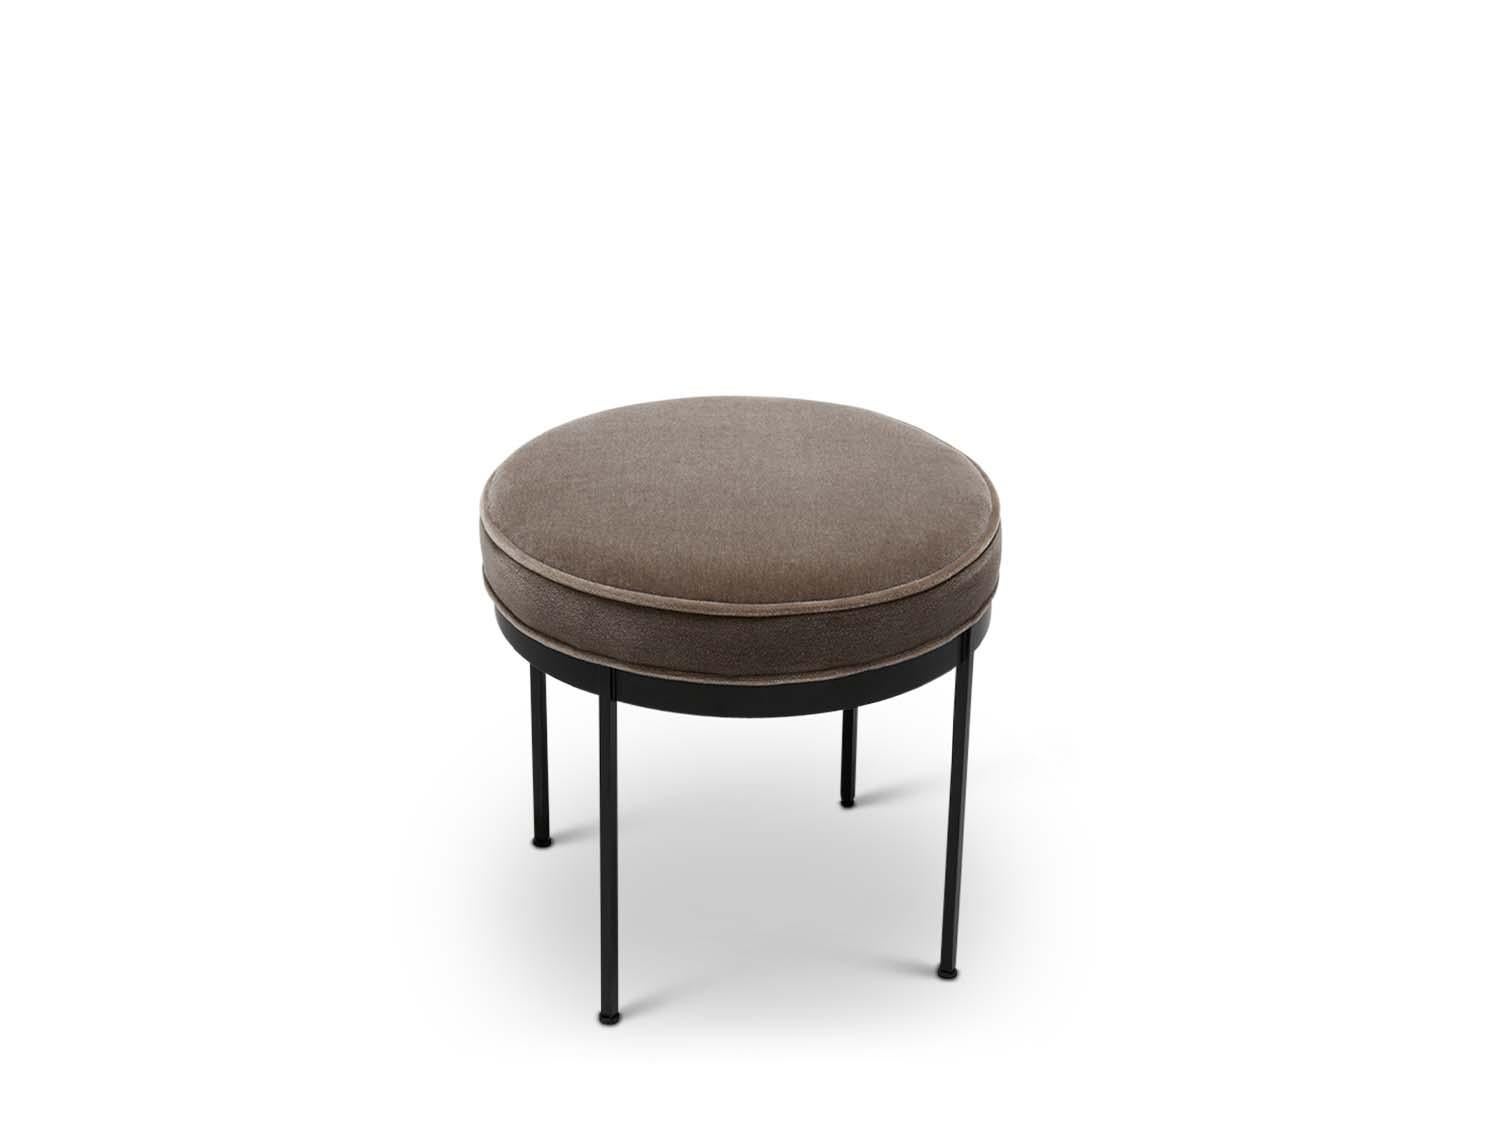 The Petite Paul ottoman features a round solid lacquered brass base and an upholstered seat with piping. Each leg features a rounded leveler. 

The Lawson-Fenning Collection is designed and handmade in Los Angeles, California. Reach out to